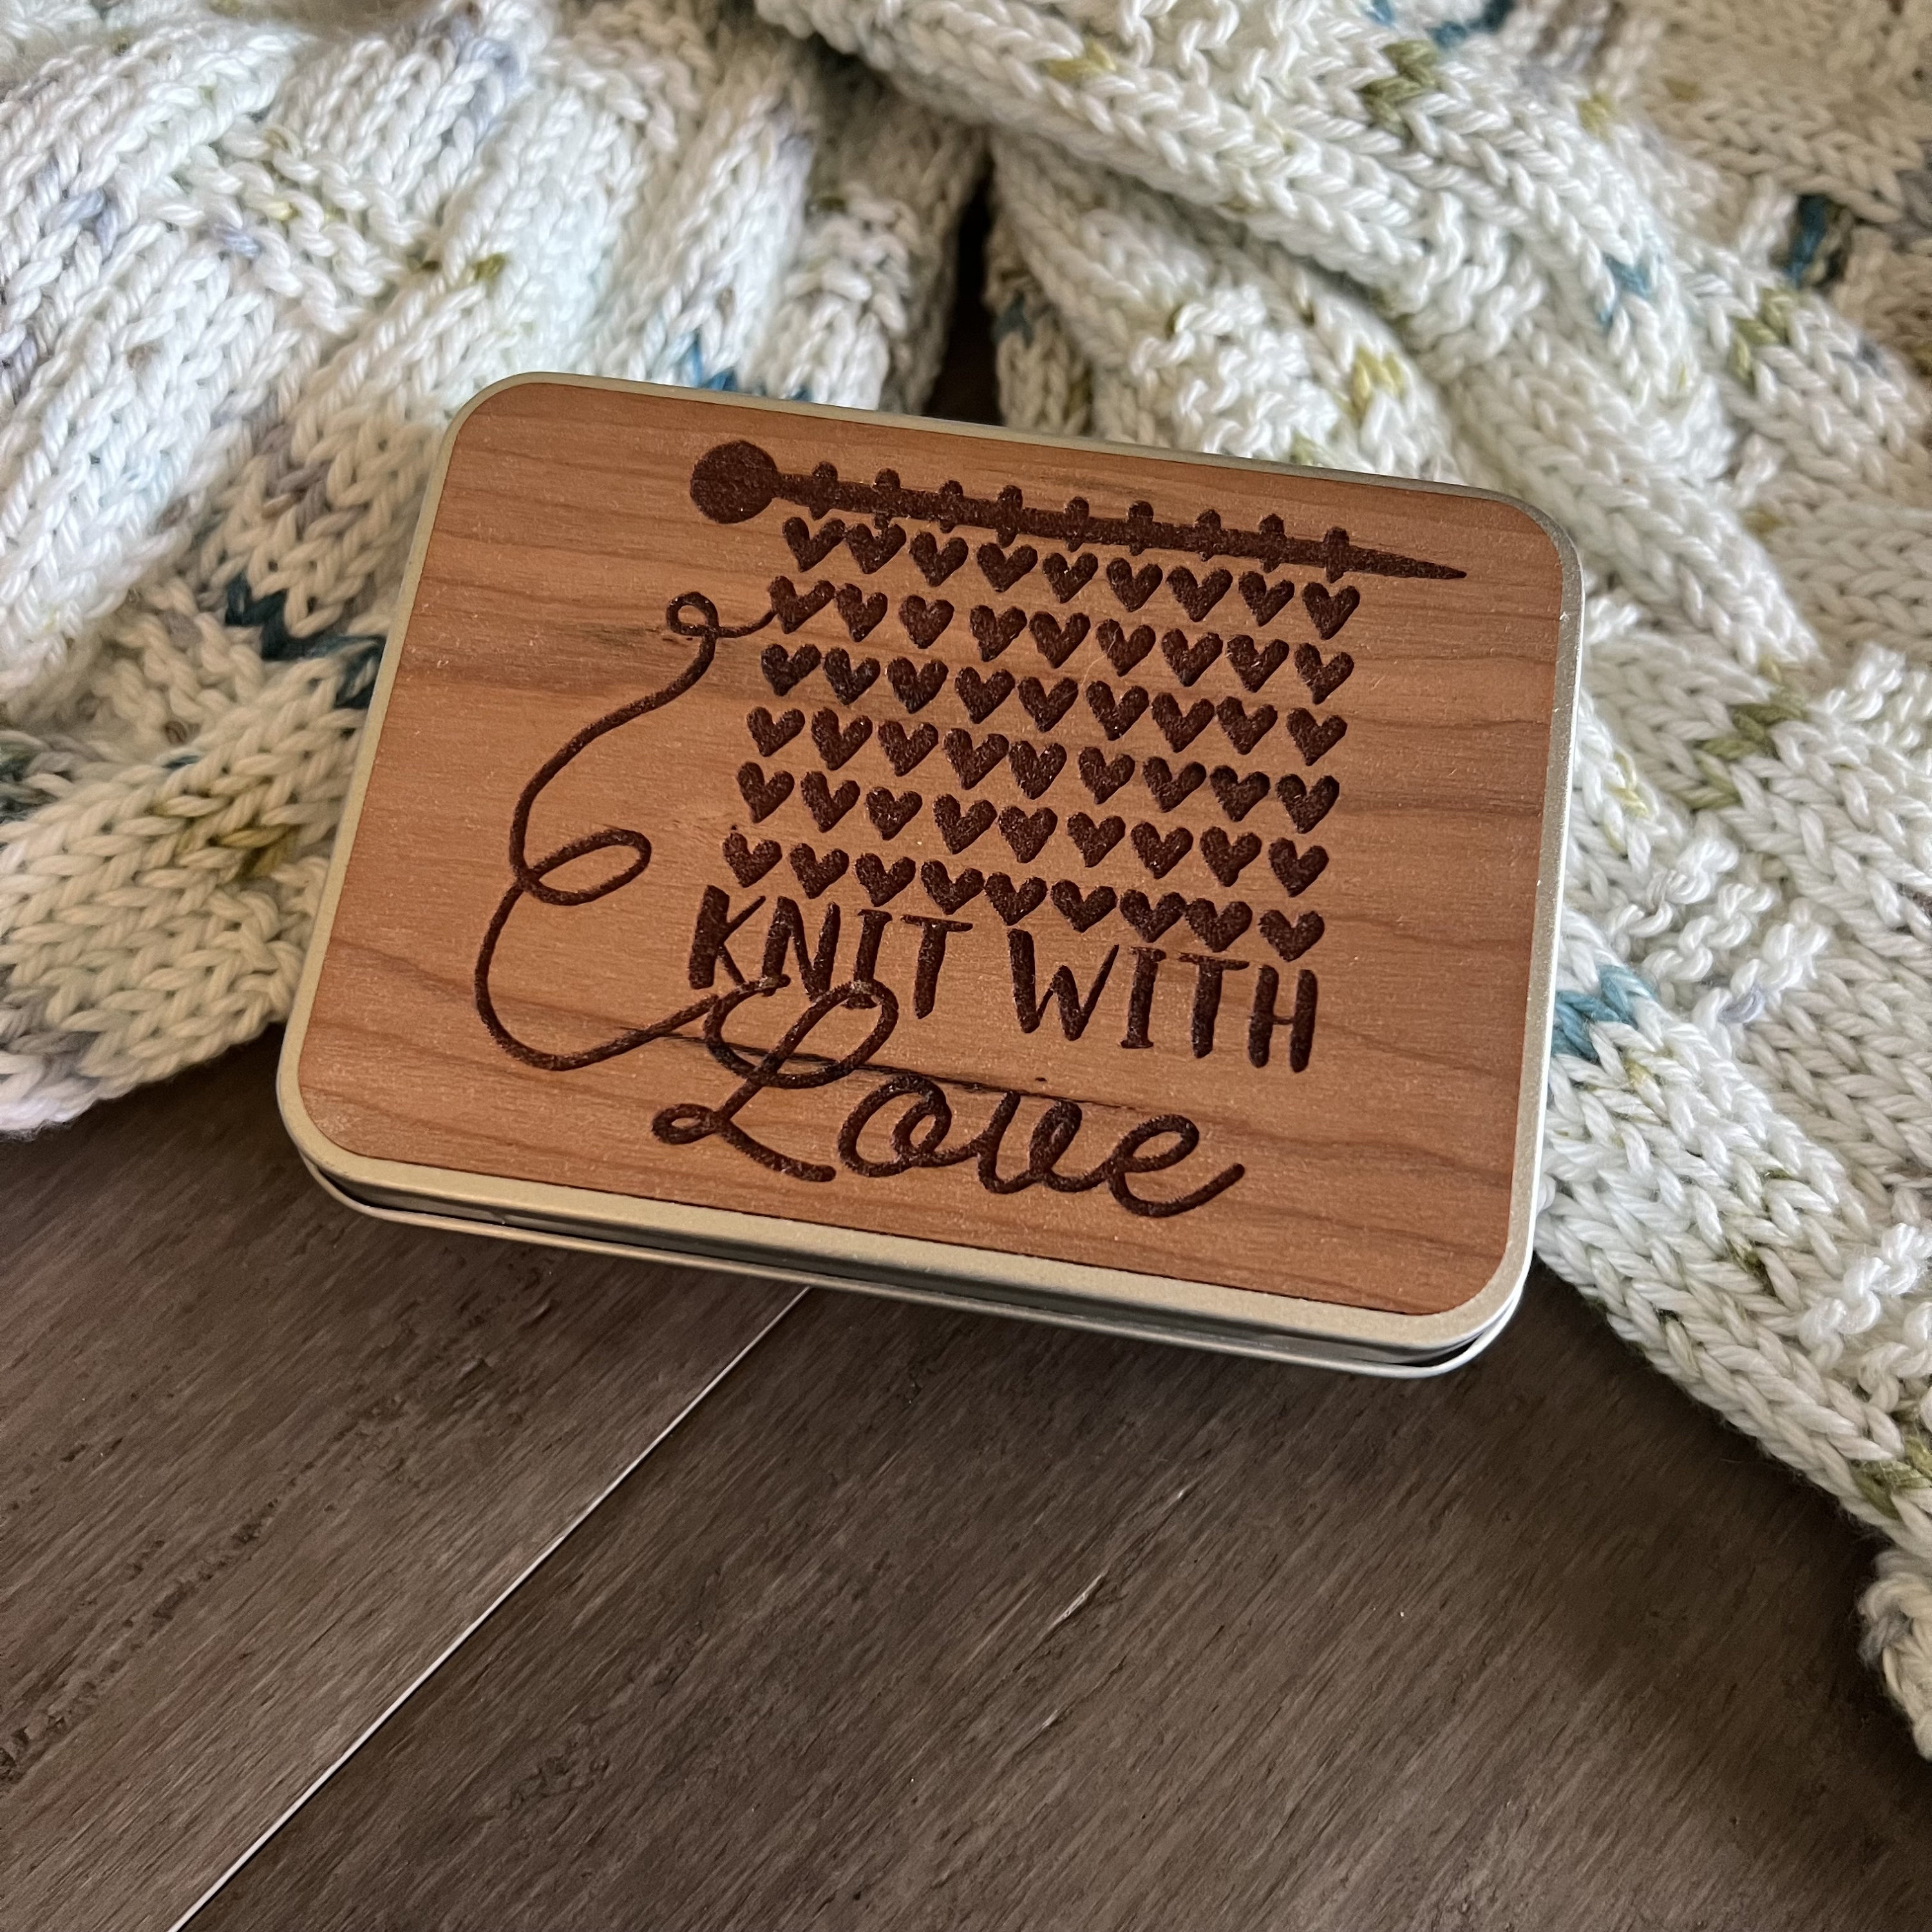 Color Your Own Travel Knitting Notions Box for Your Knit Night Project Bag  